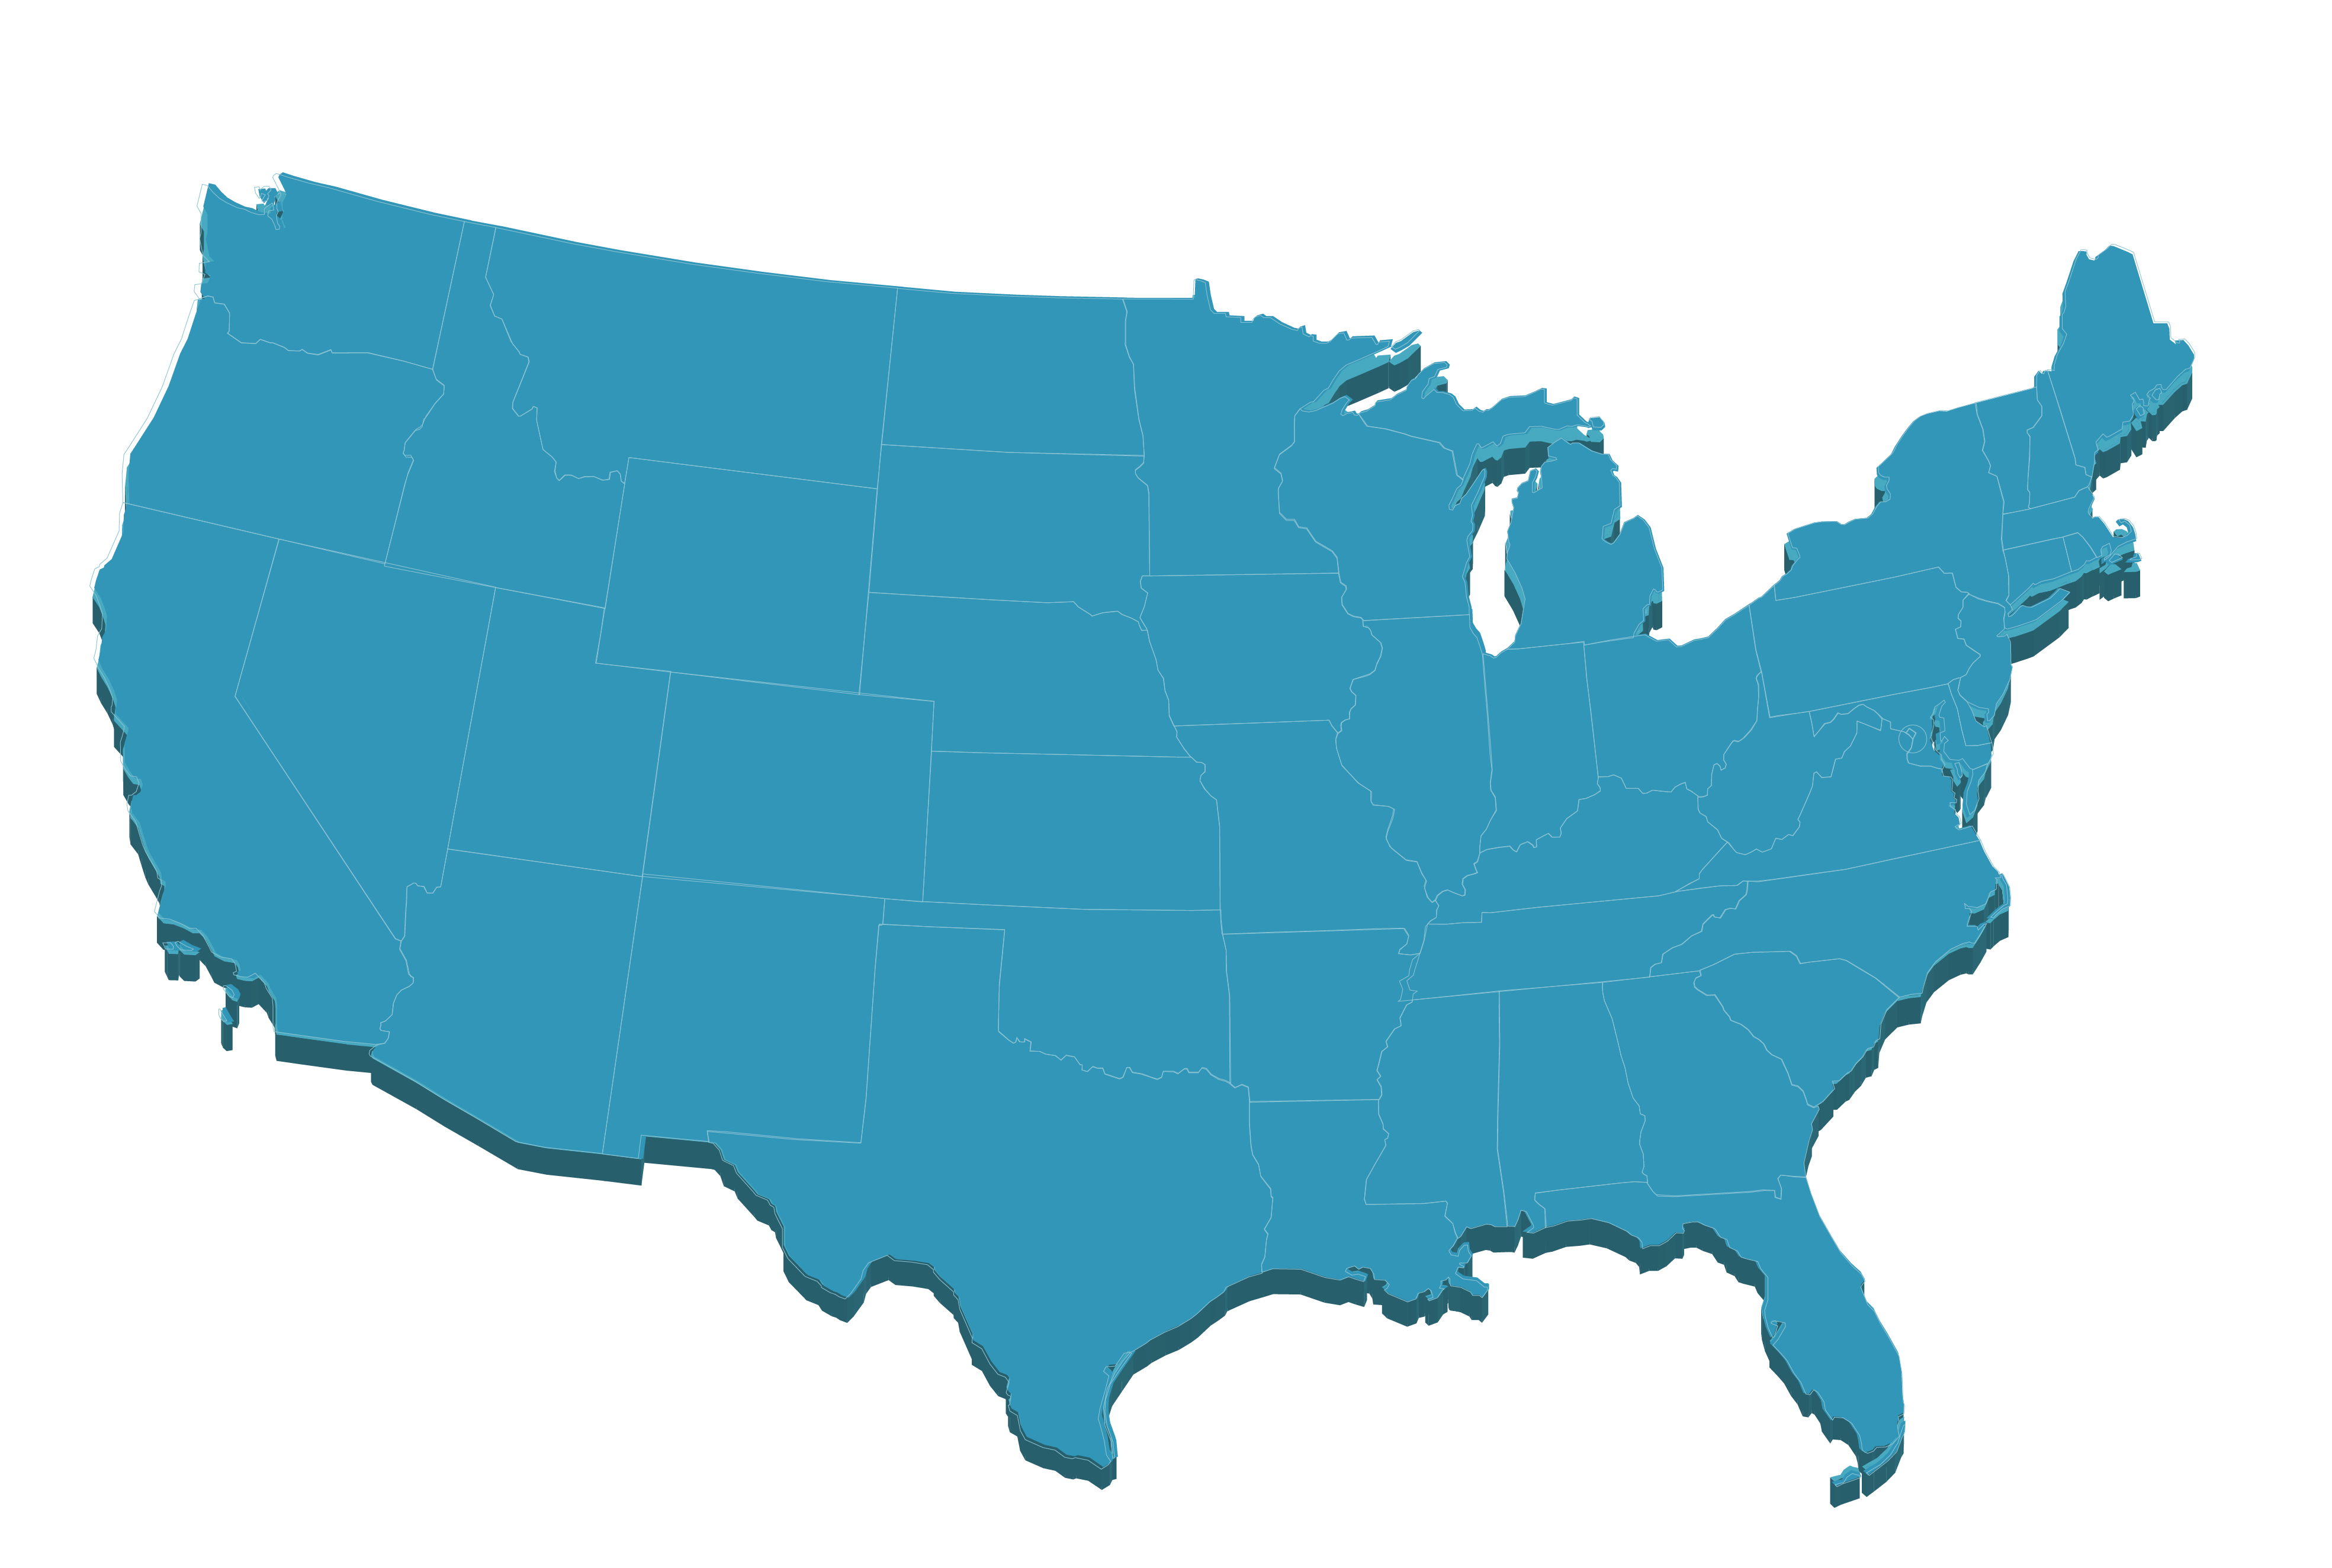 US Presidential Election 2016 United States Voting Map.